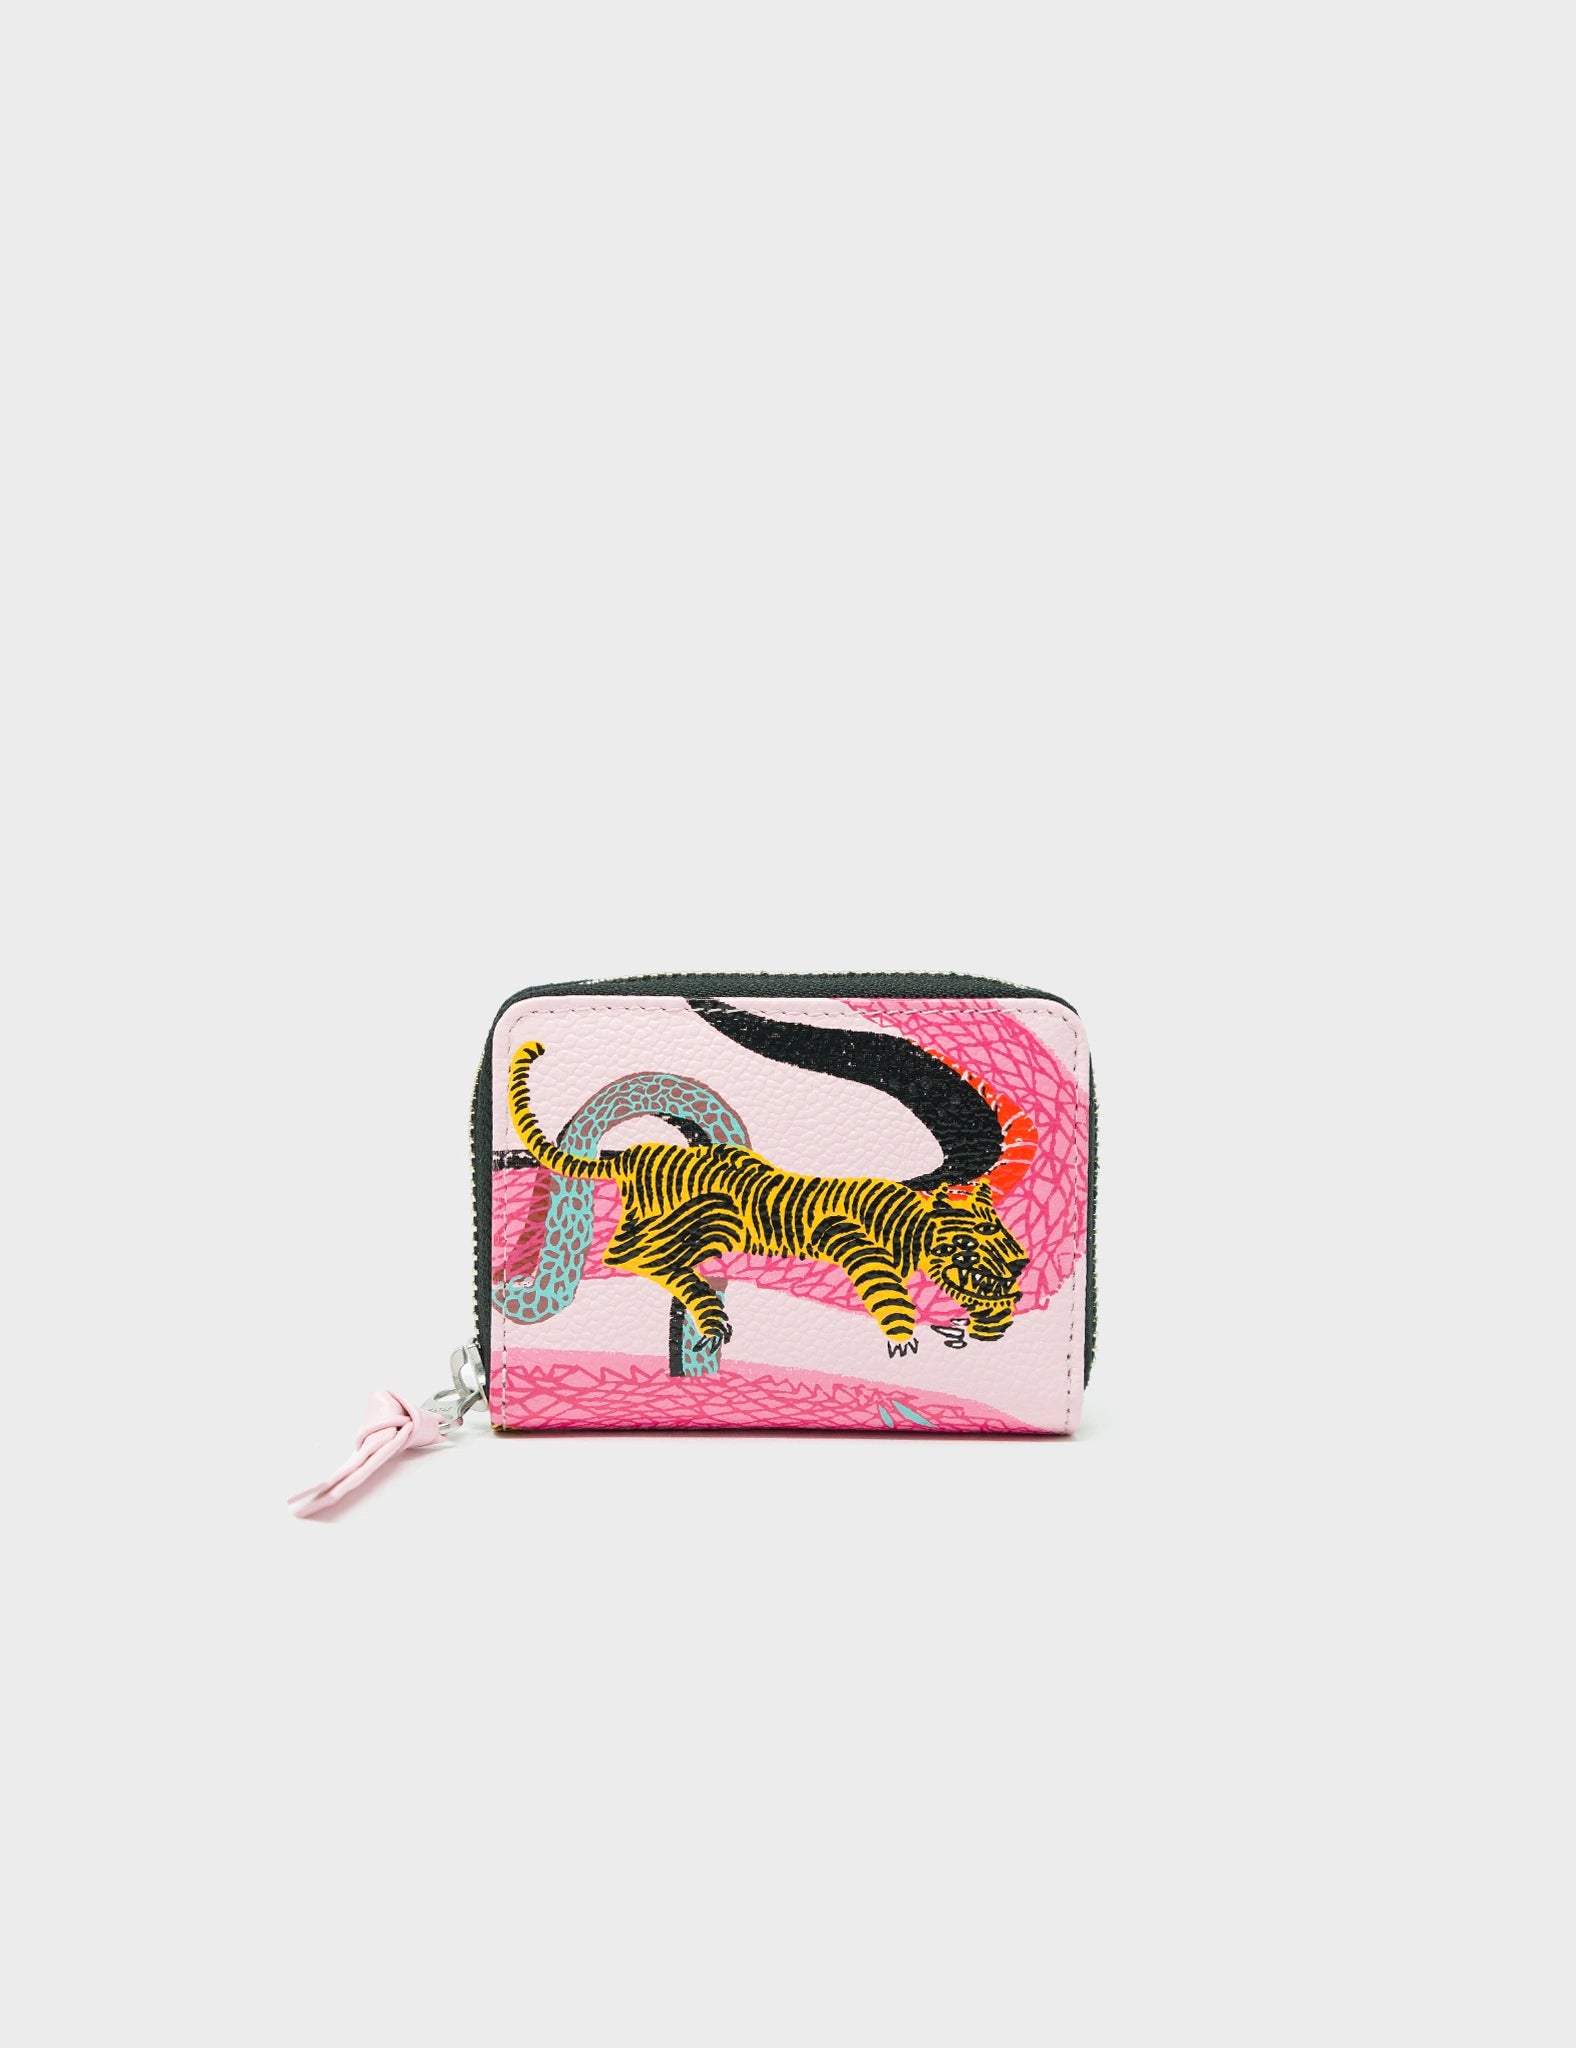 Frodo Parfait Pink Leather Zip Around Wallet - Tangle Rumble